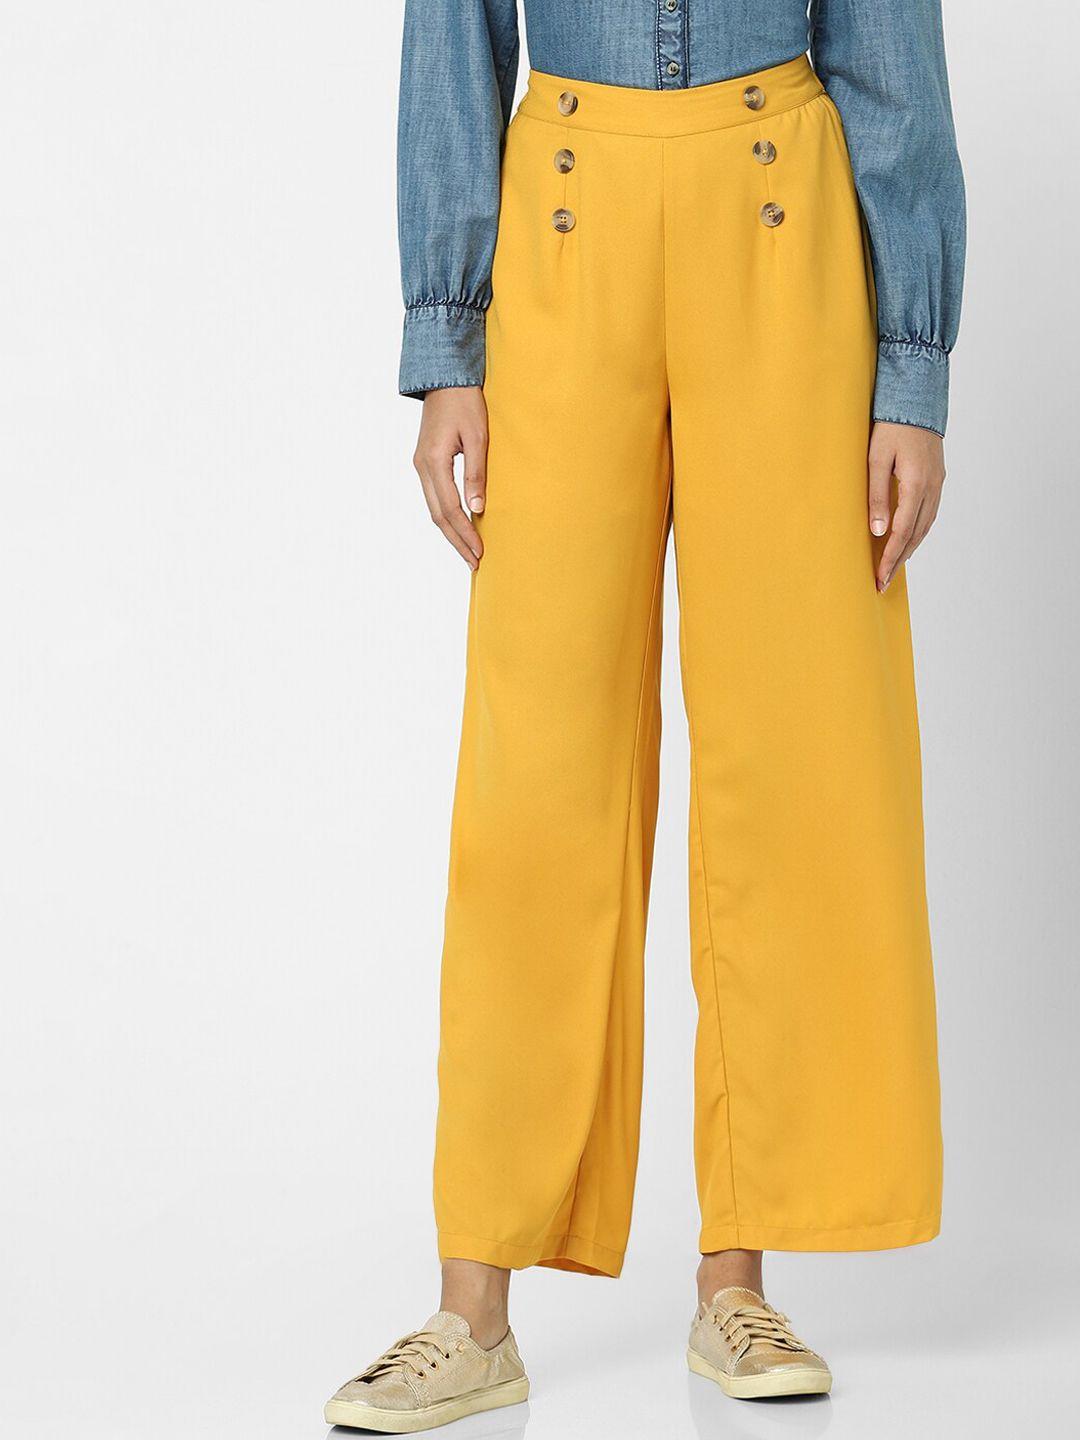 vero moda marquee collection vm smu olivia-01 women yellow flared high-rise trouser